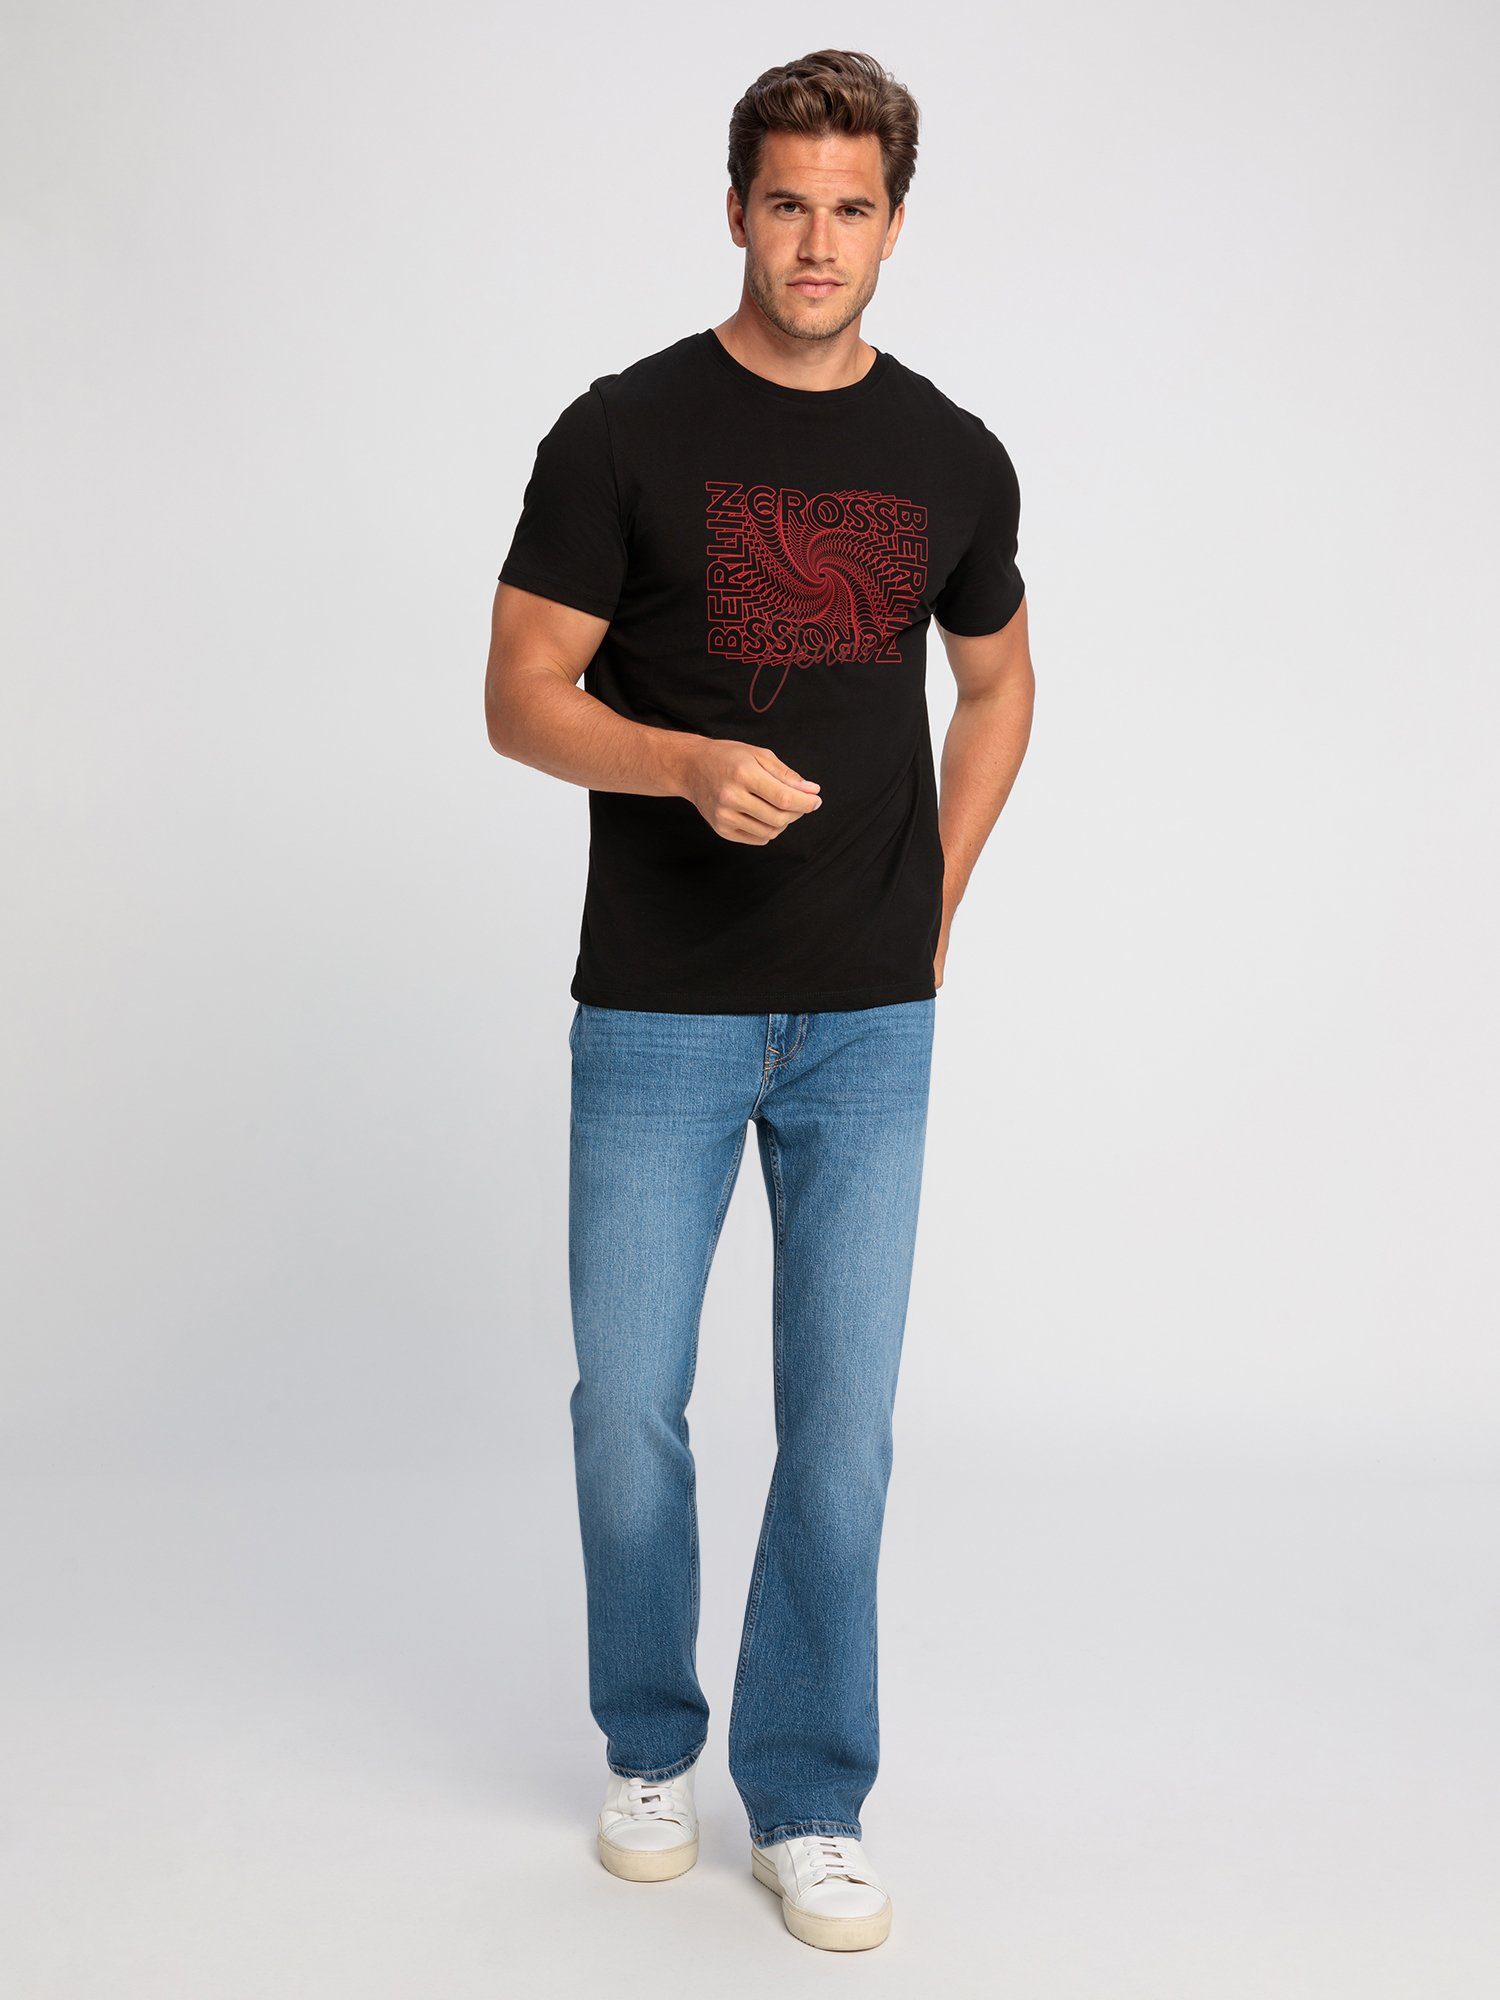 CROSS JEANS® Bootcut-Jeans Colin